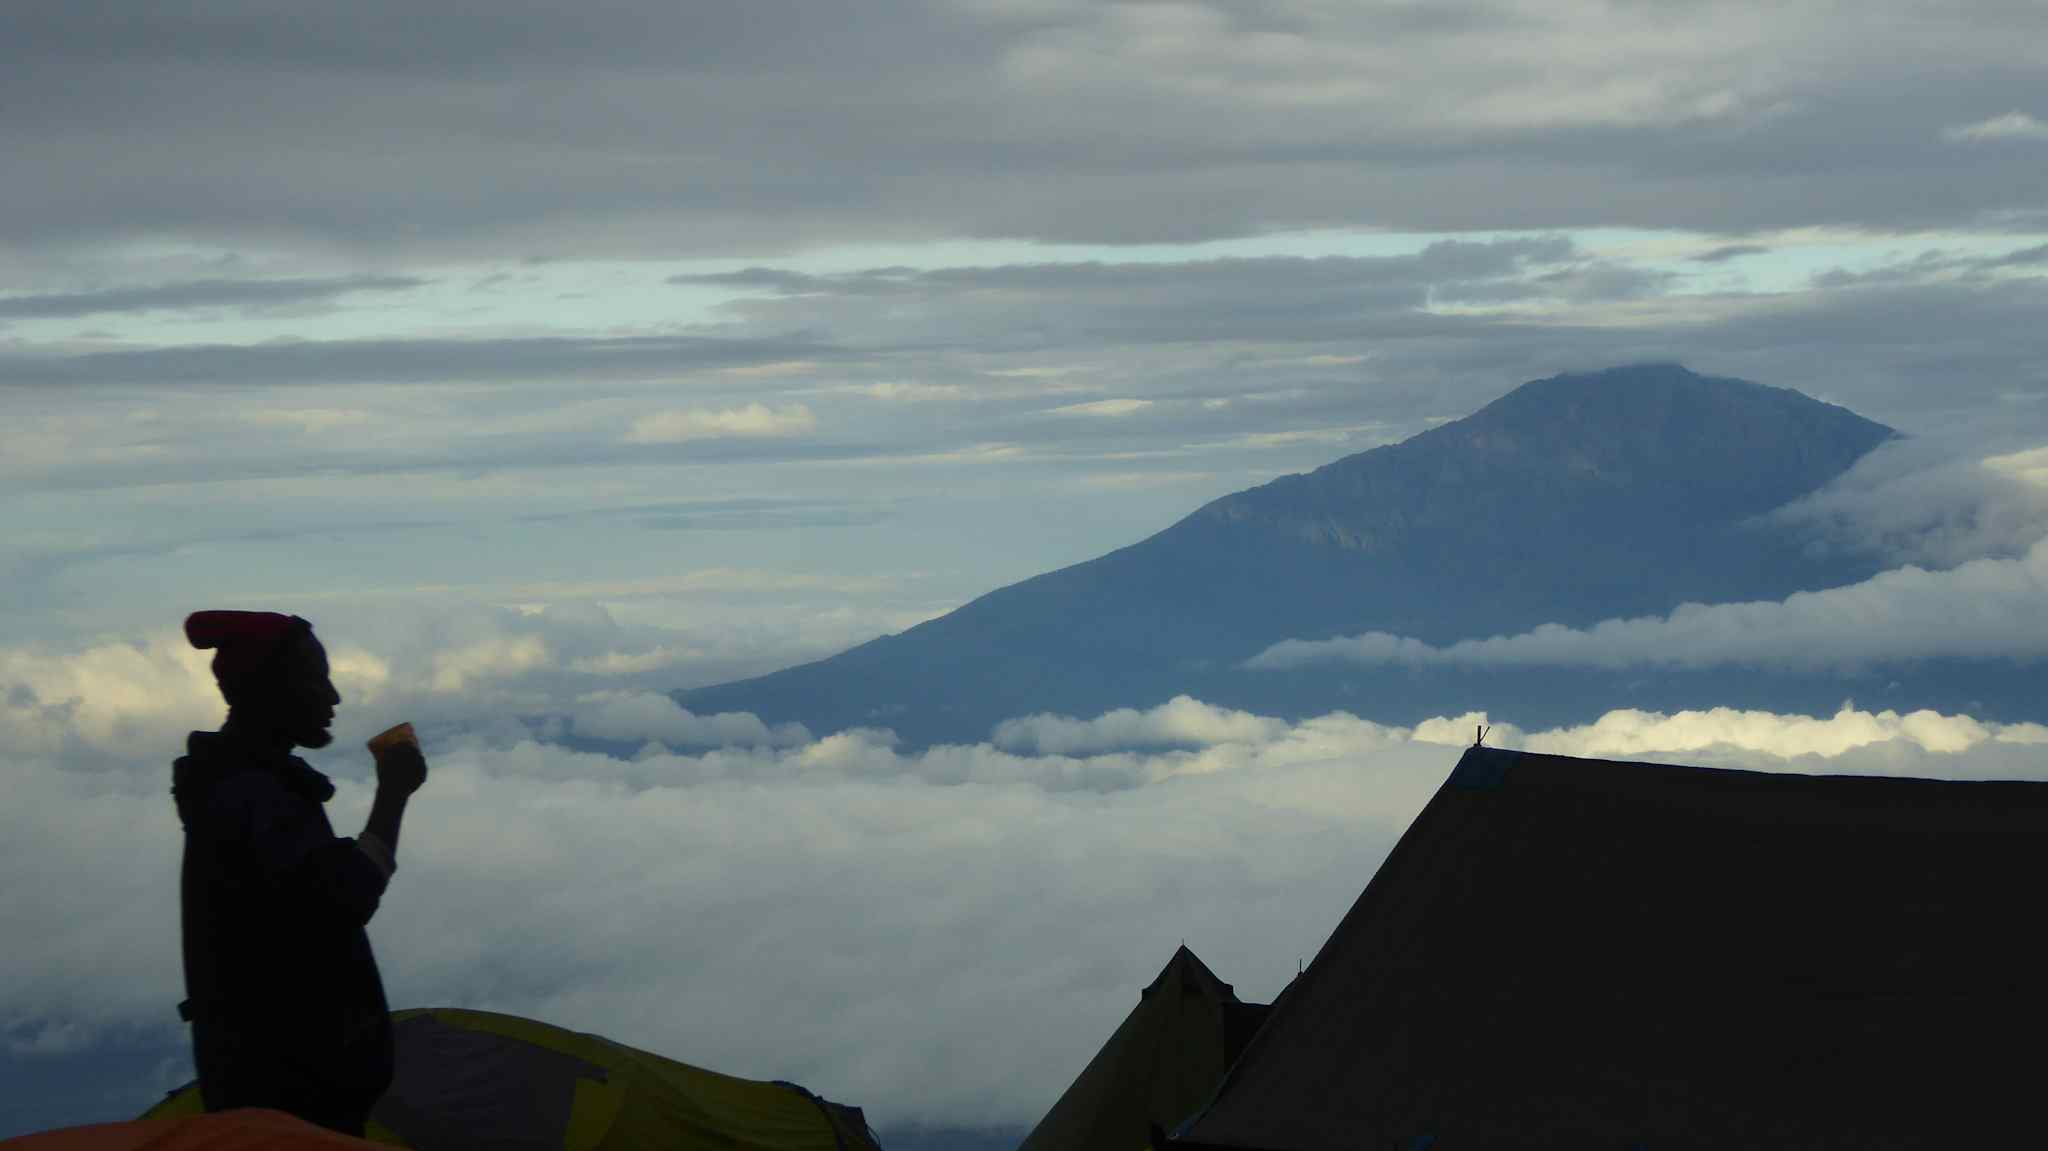 Views from camp on the Shira Plateau, Kilimanjaro, with a man drinking tea silhouetted against the mountains.